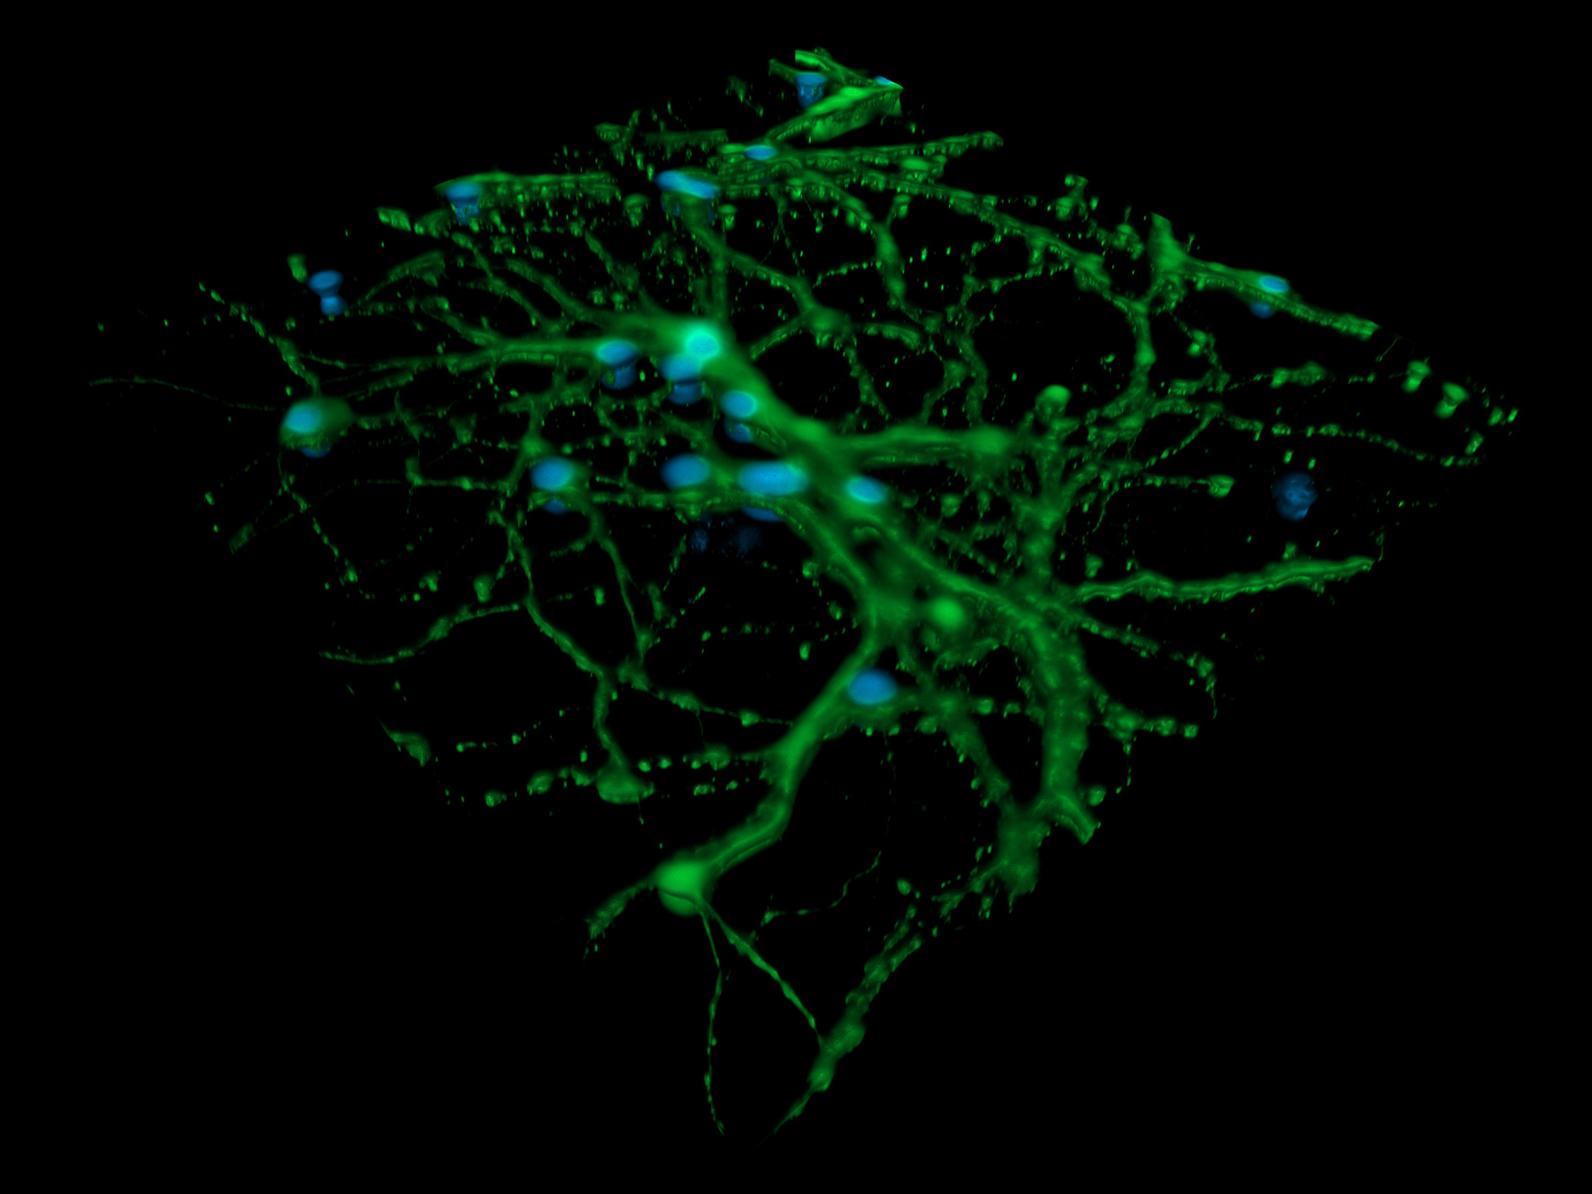 Comparison of a widefield image and 3D rendering of cortical neurons stained for DNA and microtubules. Courtesy of L. Behrendt, Leibniz-Institute on Aging – Fritz-Lipmann-Institut e.V. (FLI), Germany.